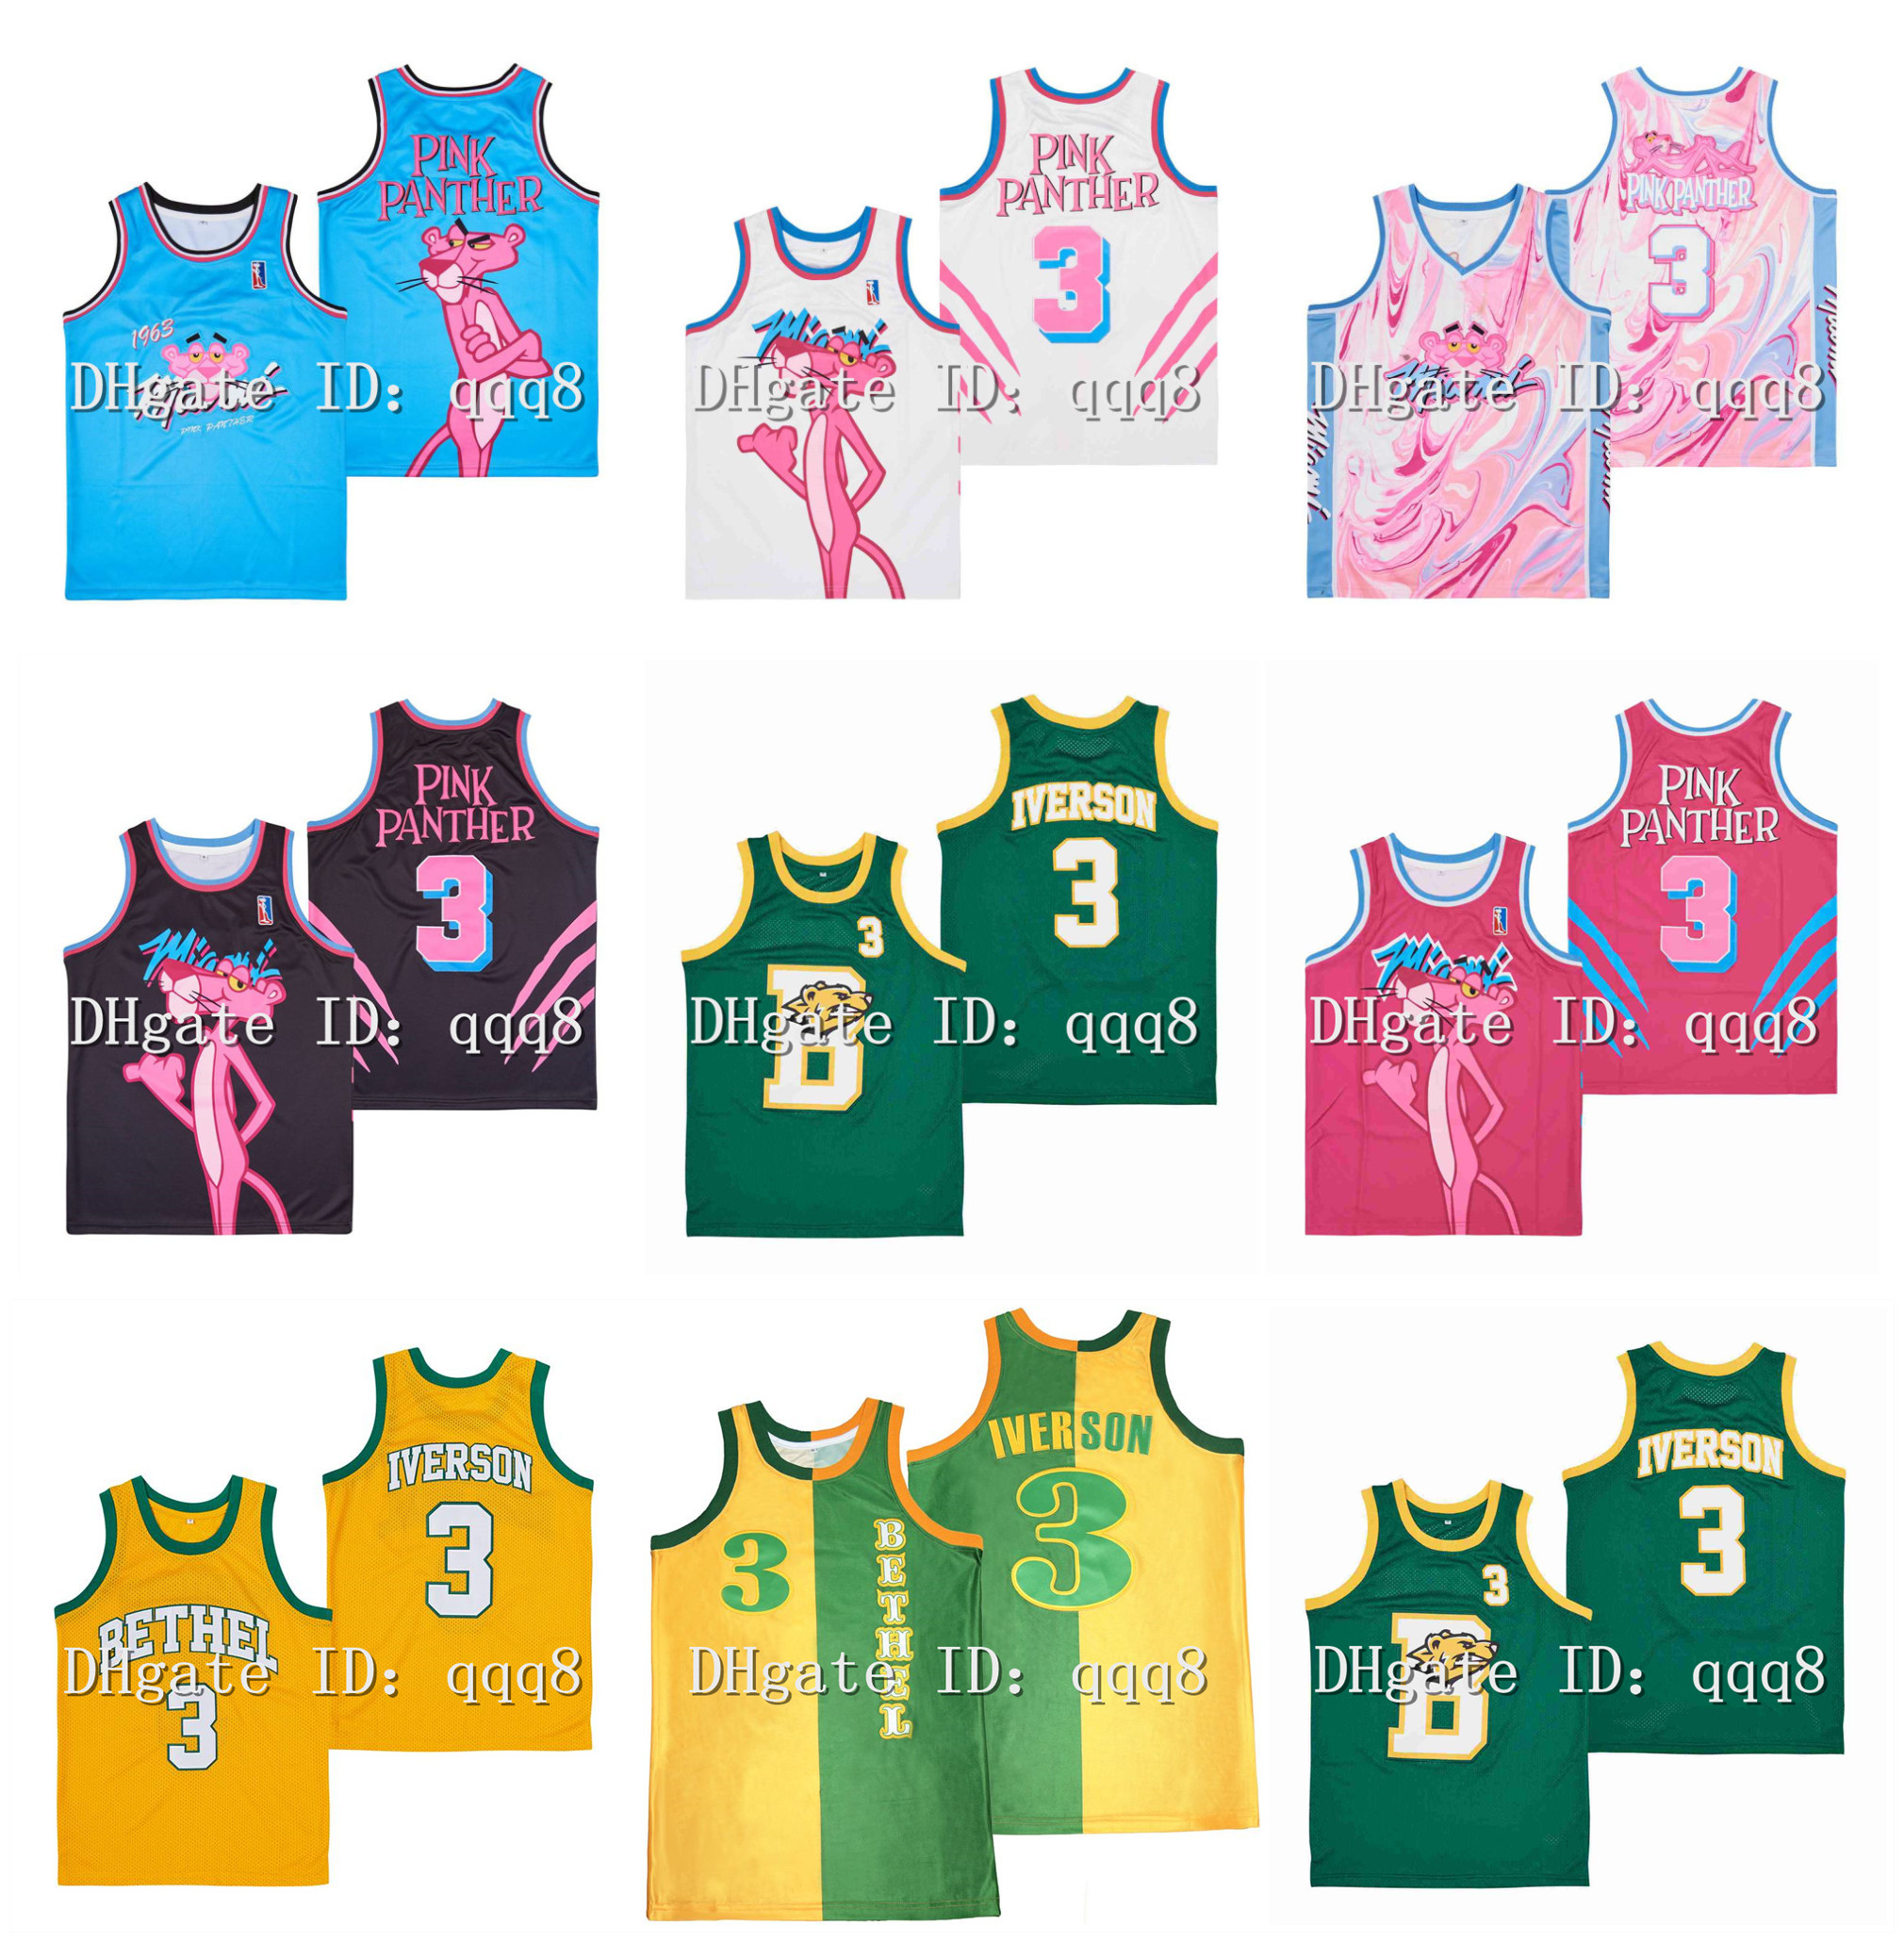 PINK PANTHER 3 MIAMI BASKETBALL JERSEY Allen 3 Iverson Bethel High FRIDAY 23 Basketball Jersey от DHgate WW